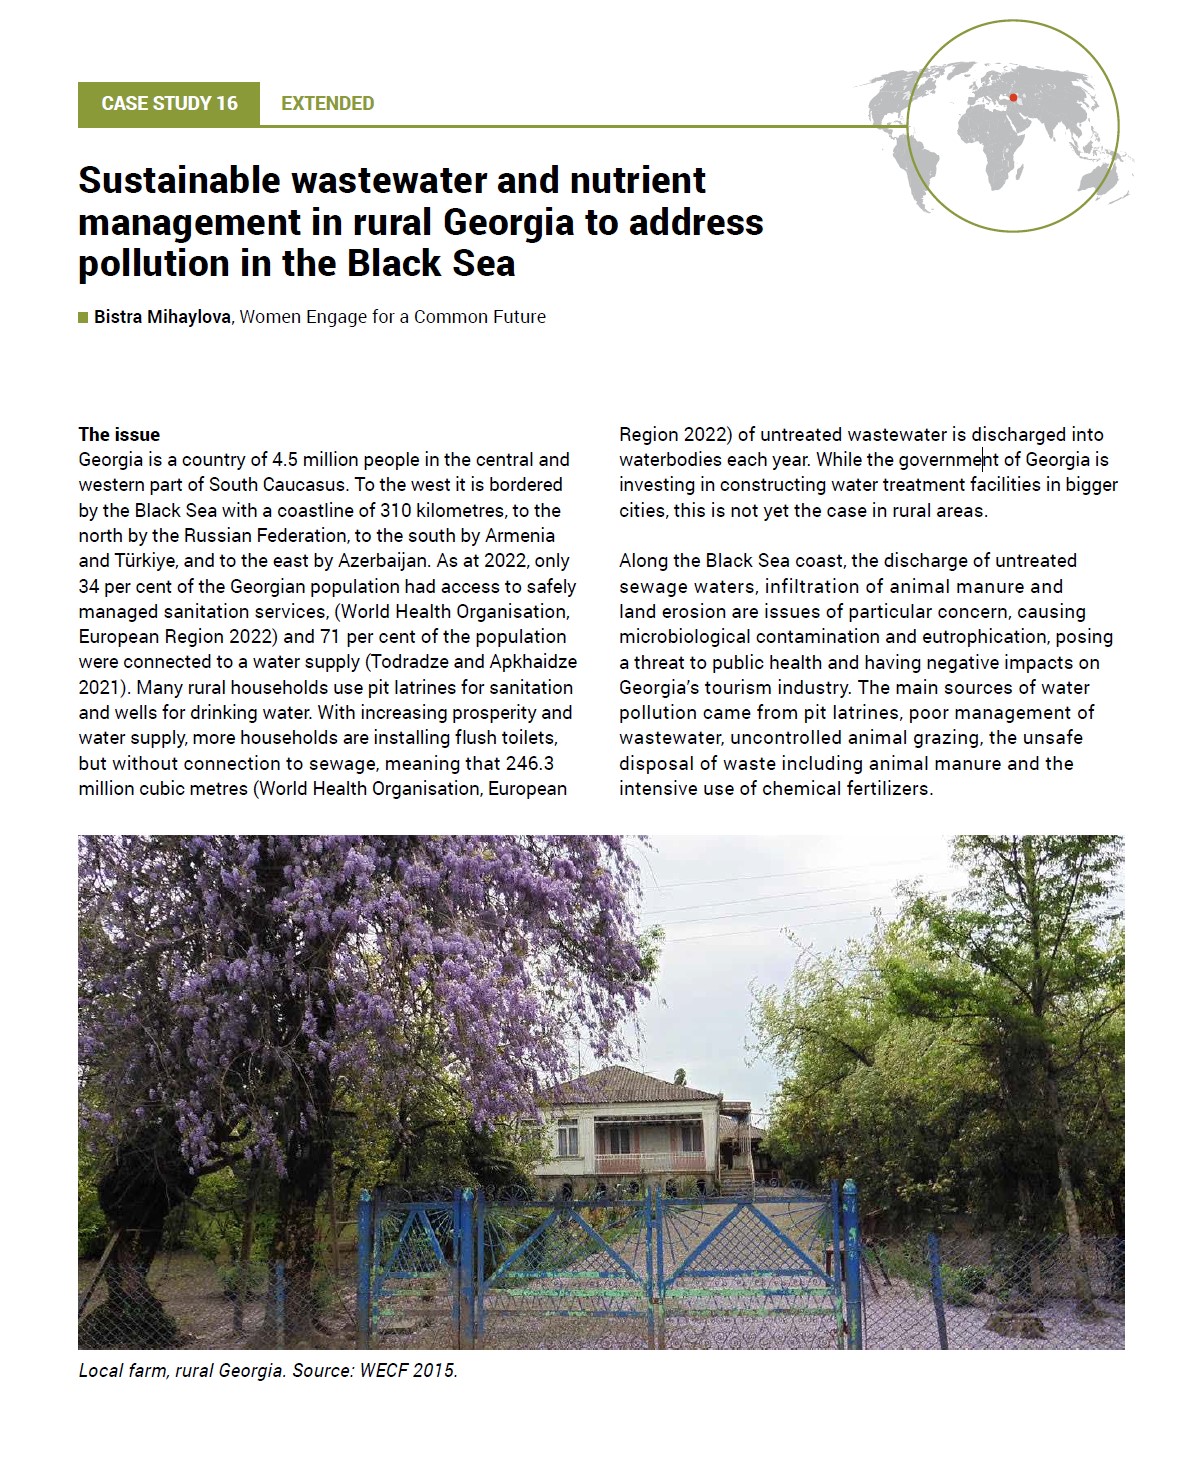 Case study 16: Sustainable wastewater and nutrient management in rural Georgia to address pollution in the Black Sea